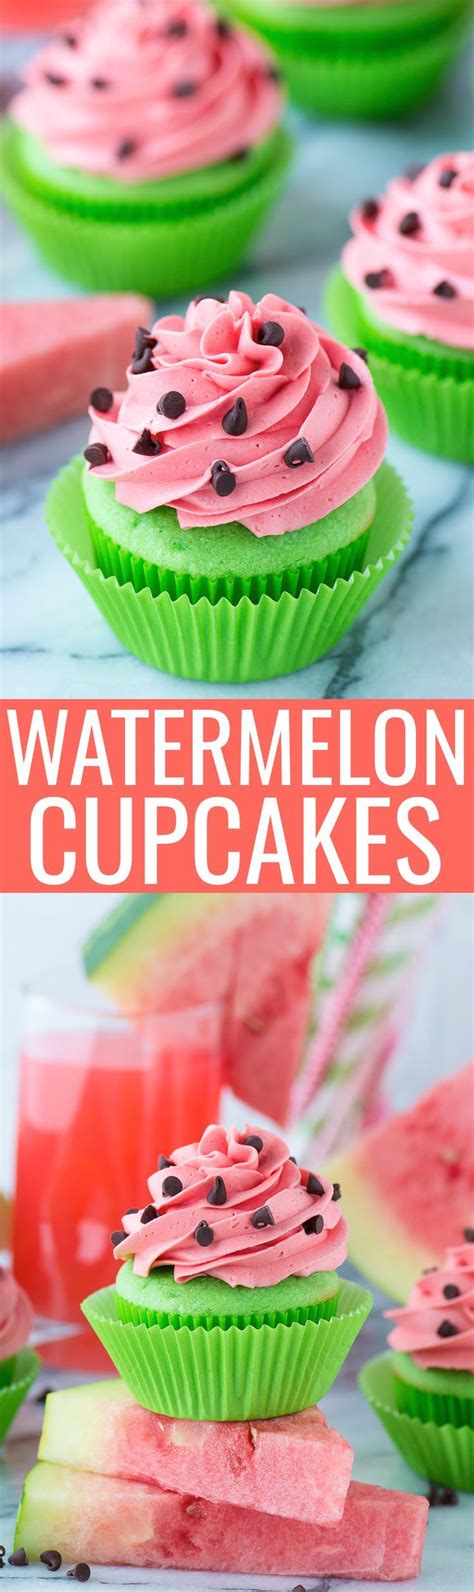 Watermelon Cupcakes Bright Green Cupcakes With Buttercream That Tastes